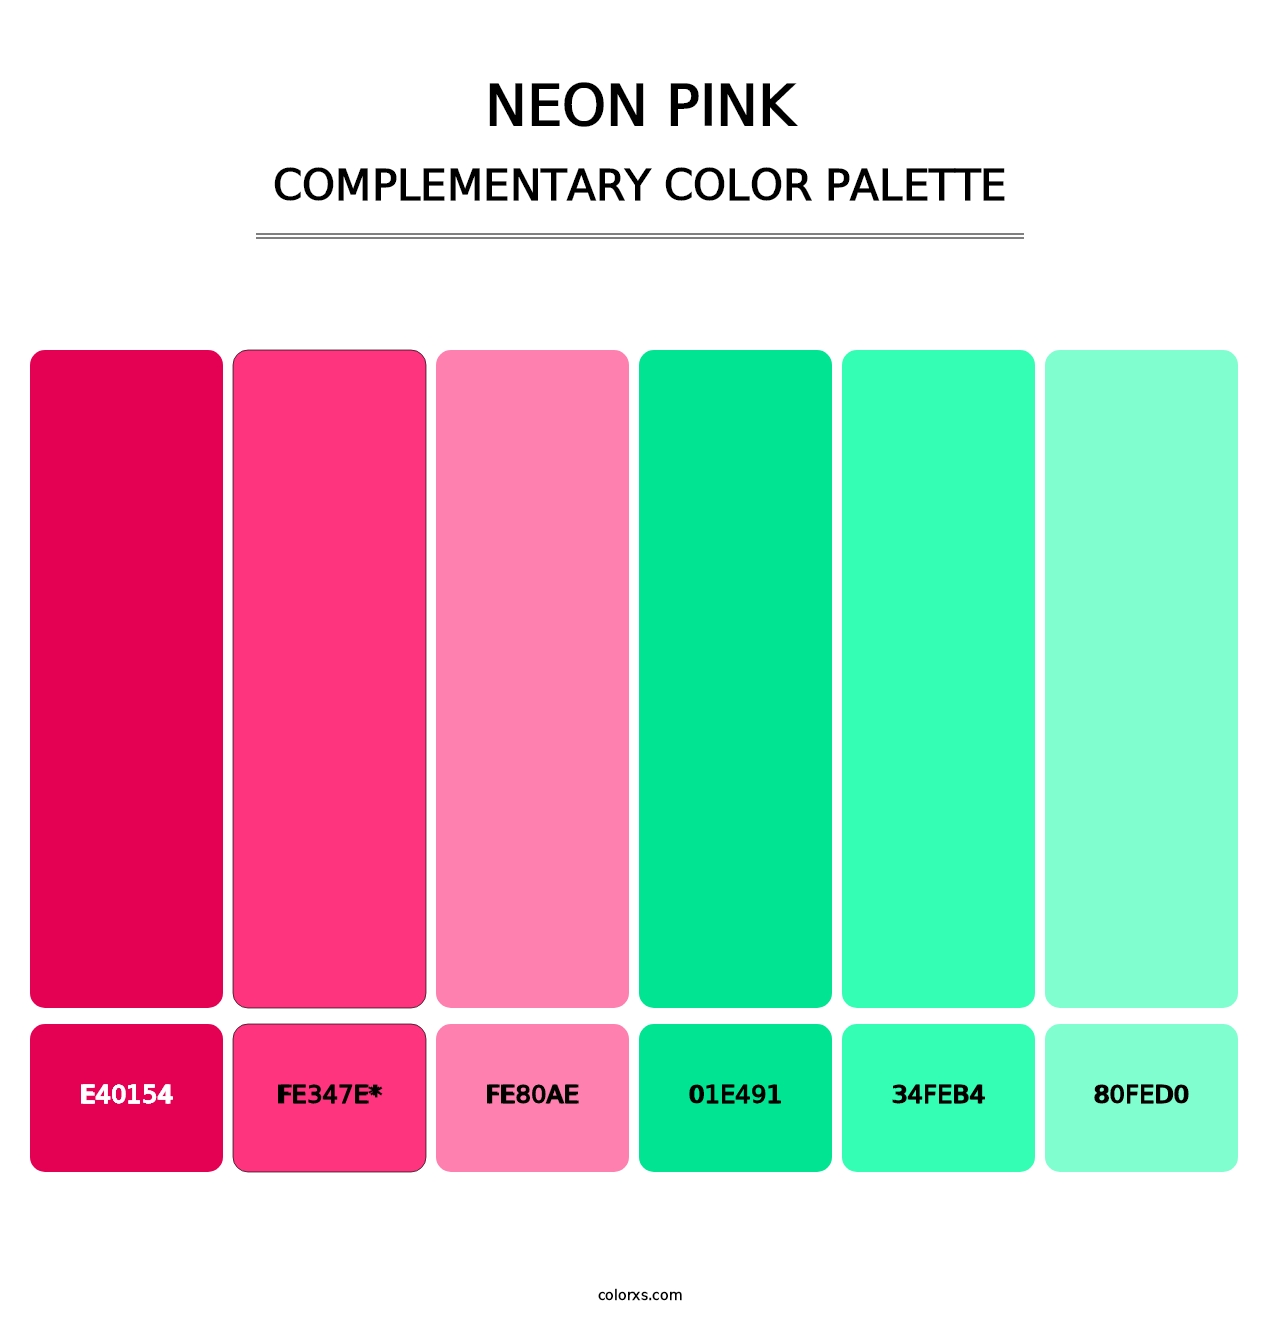 Neon Pink - Complementary Color Palette